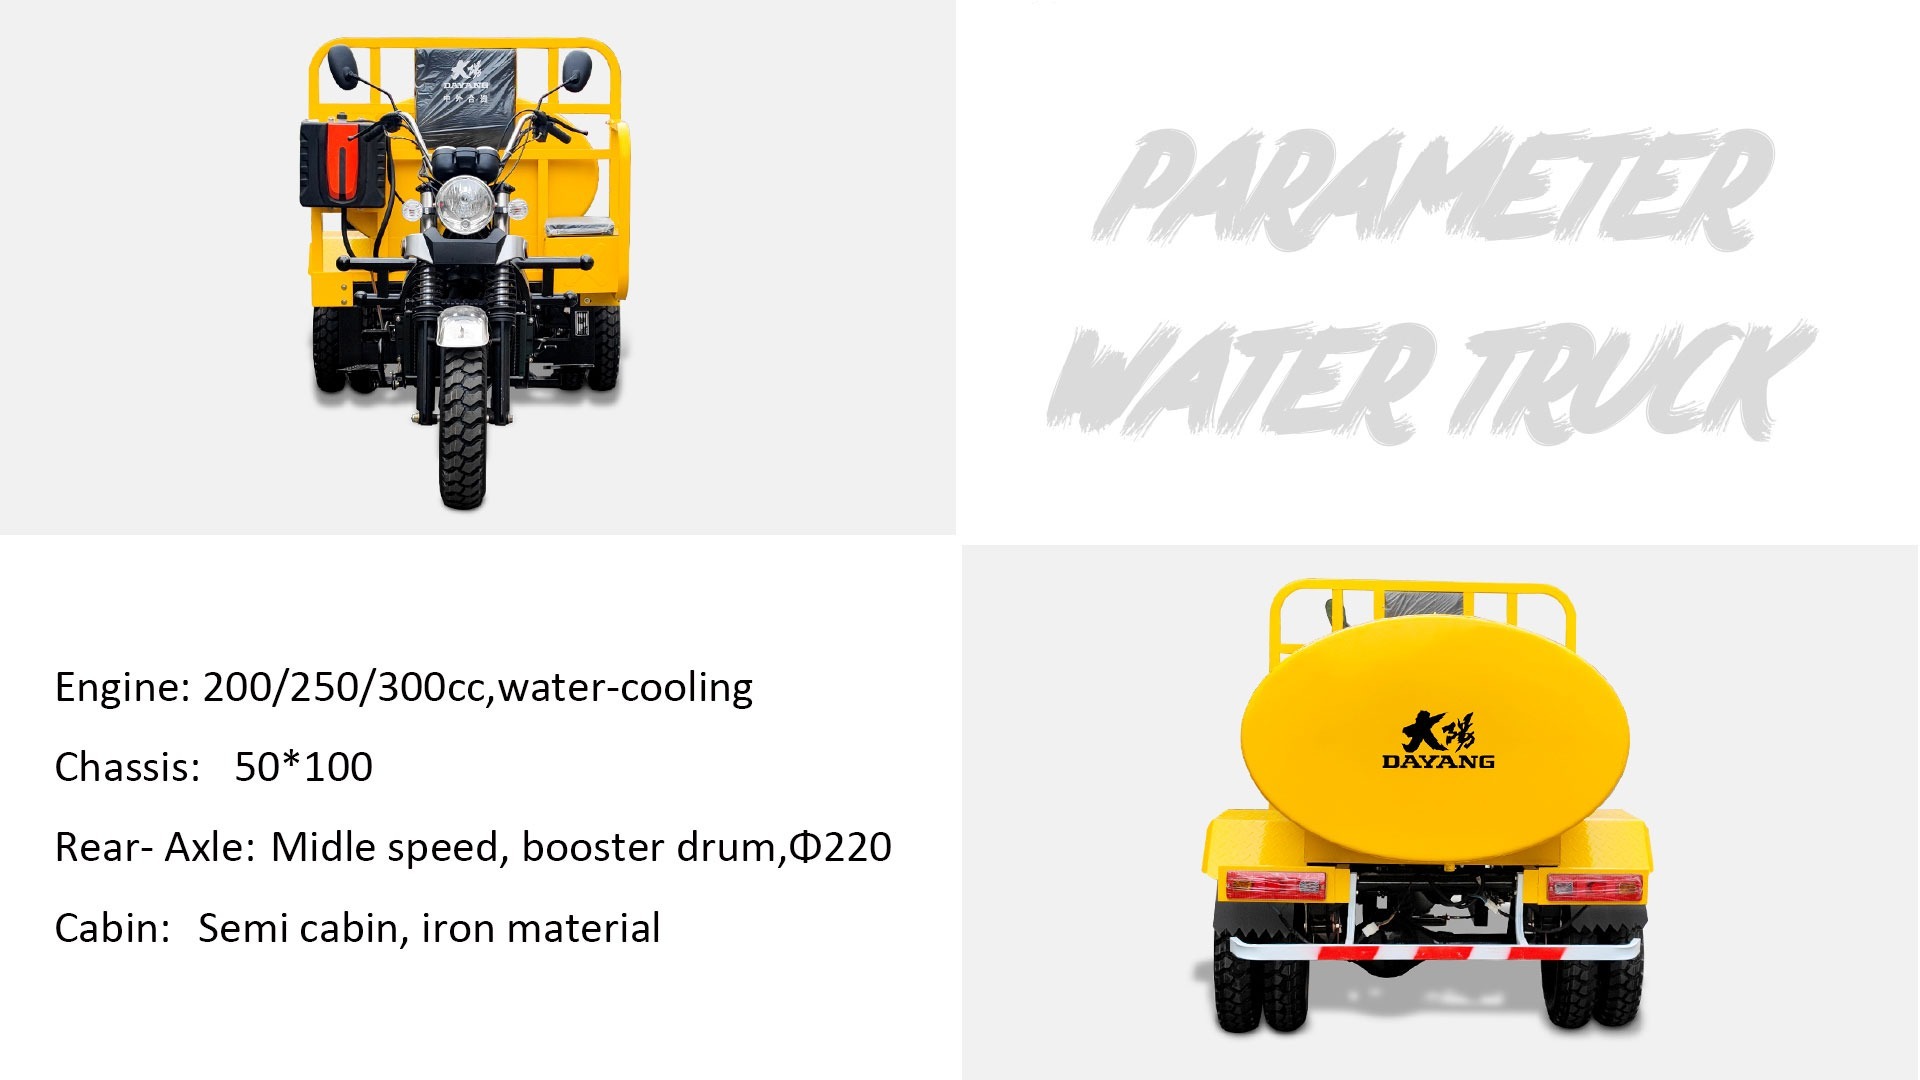 DY-TW1 DAYANG water tank tricycle for carrying water oil of 1600L big water tank